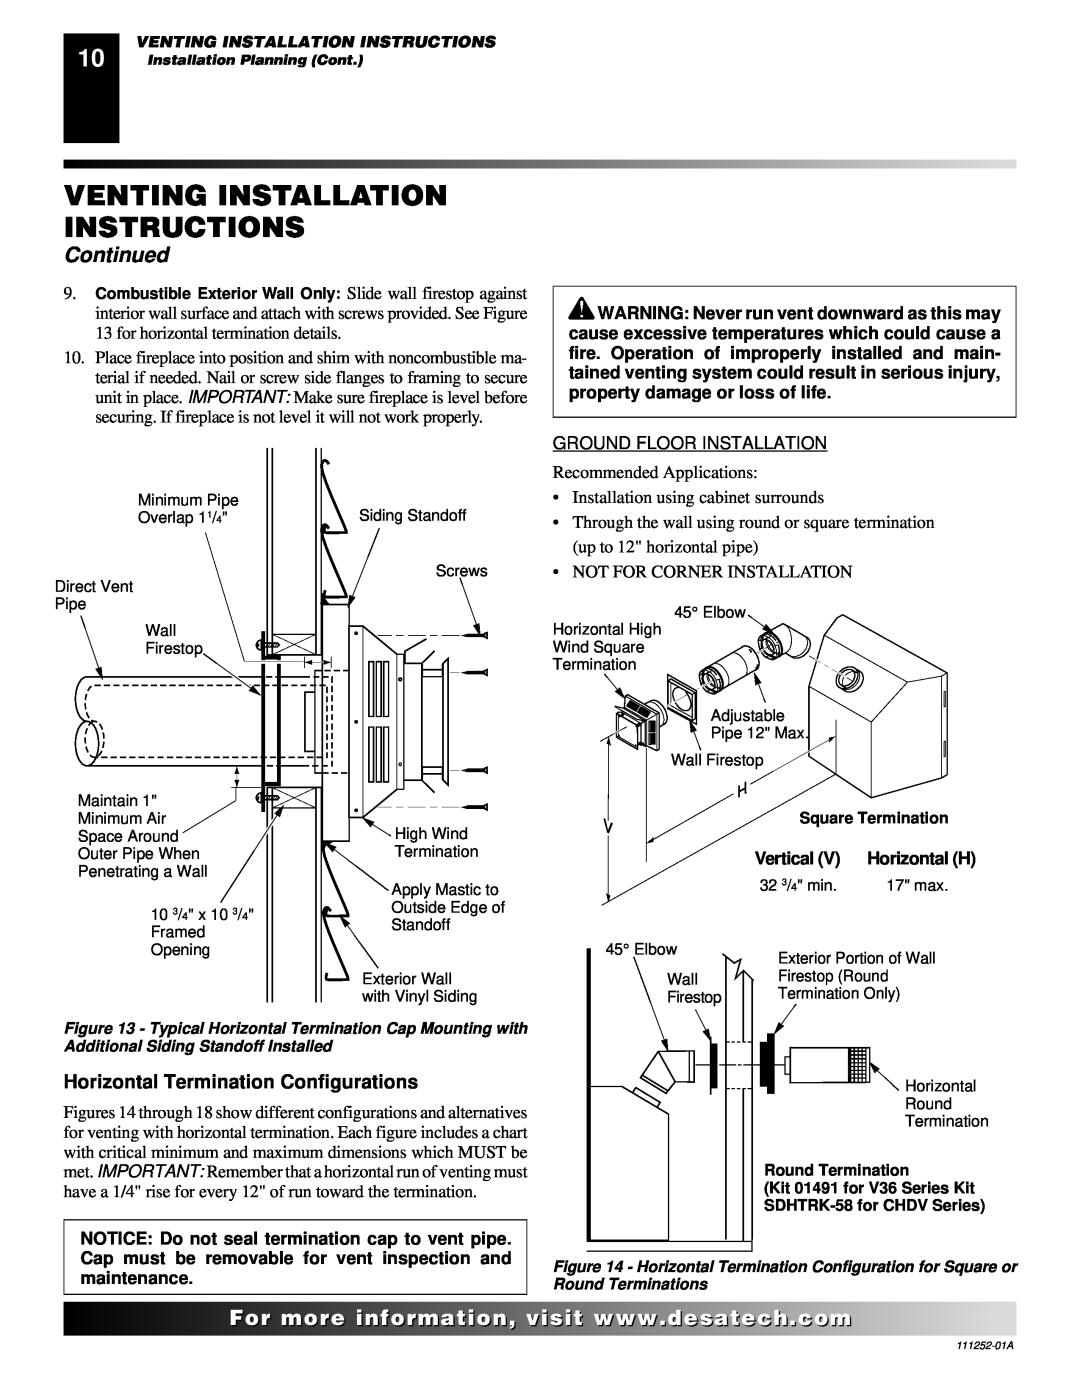 Desa CHDV36NRA installation manual Horizontal Termination Configurations, Venting Installation Instructions, Continued 